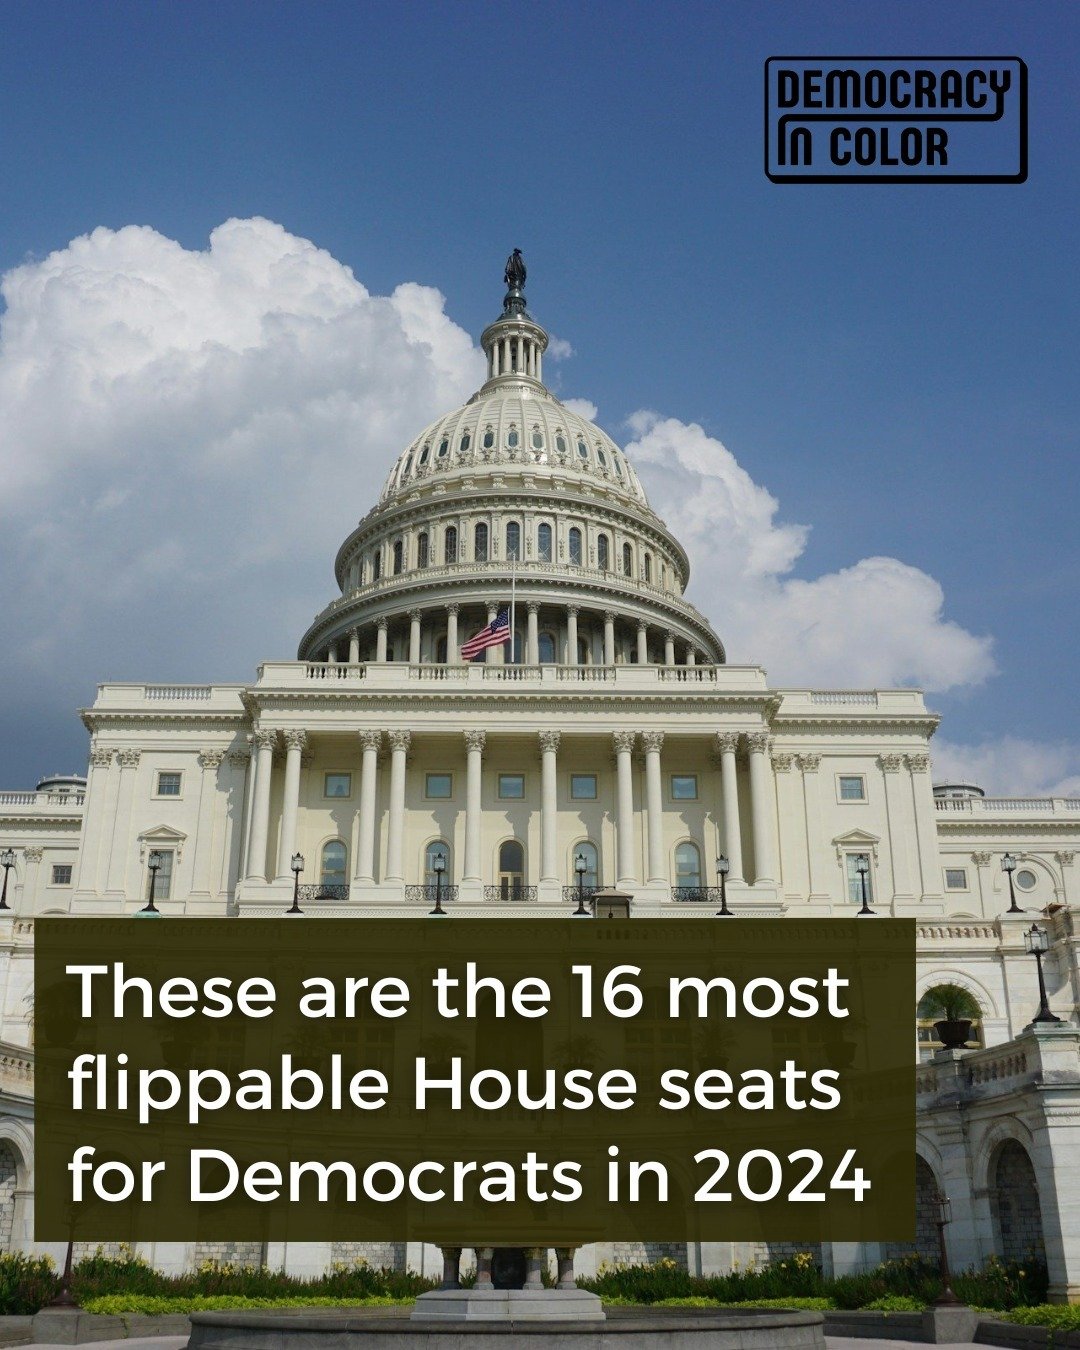 NEW ON THE BLOG: Democrats have a clear path to taking back the House and restoring a functioning federal government that serves everyone. 

@jmo.____ shares how they can do it with the updated New Majority Index developed by @sphilli.

Link in our b